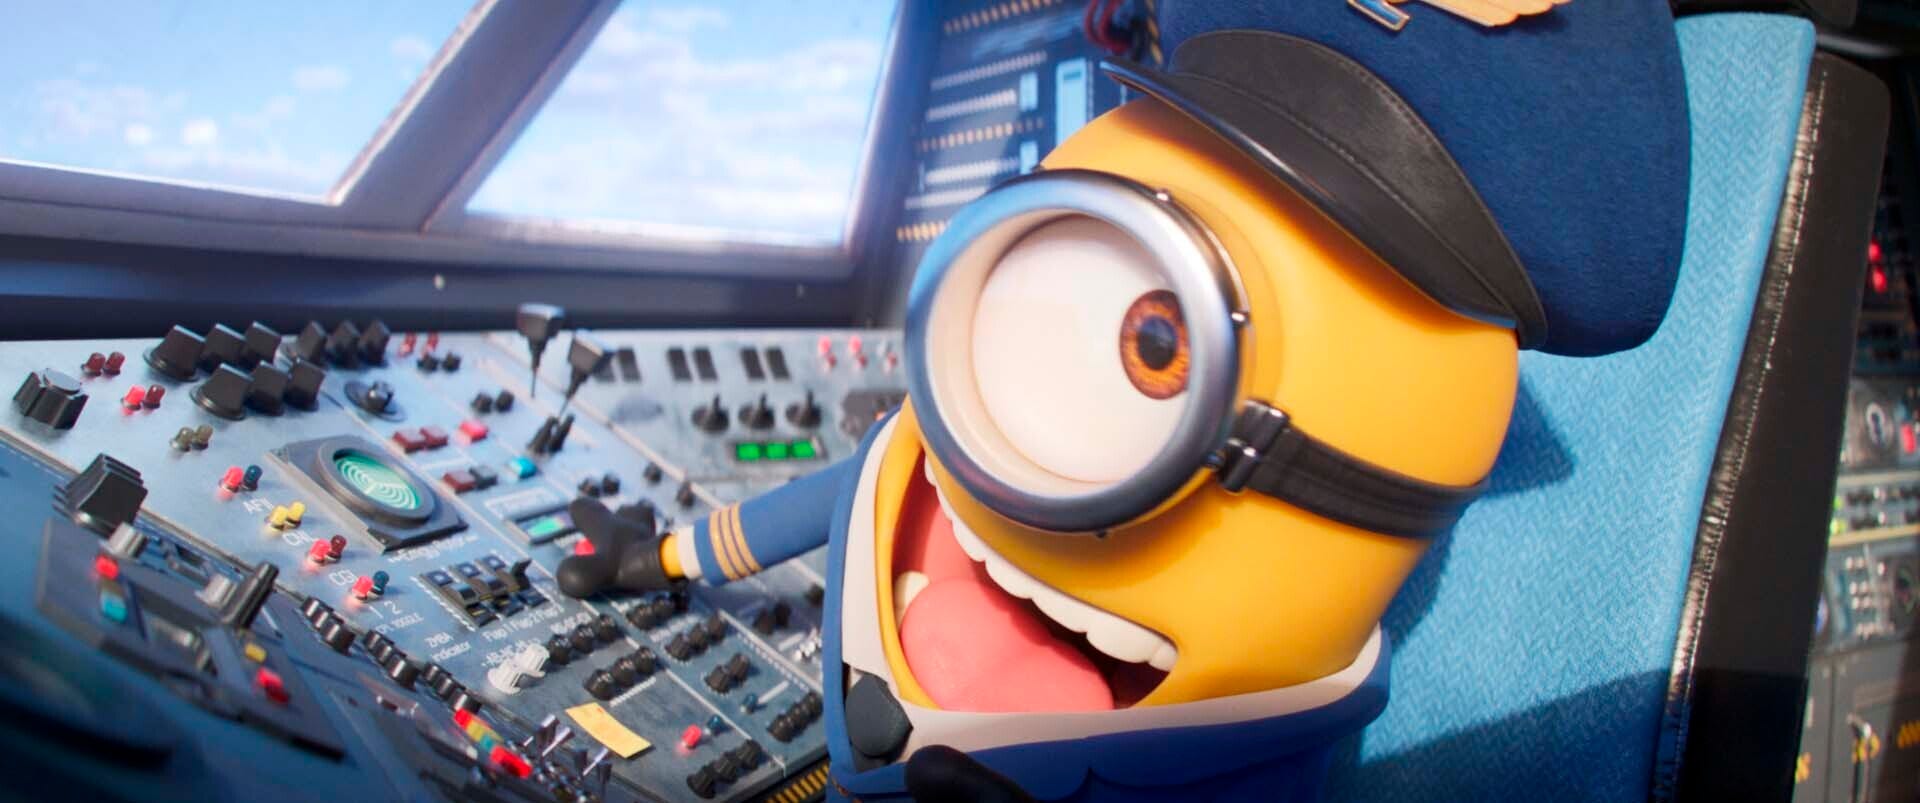 'Minions' set box office on fire with $108.5 million debut